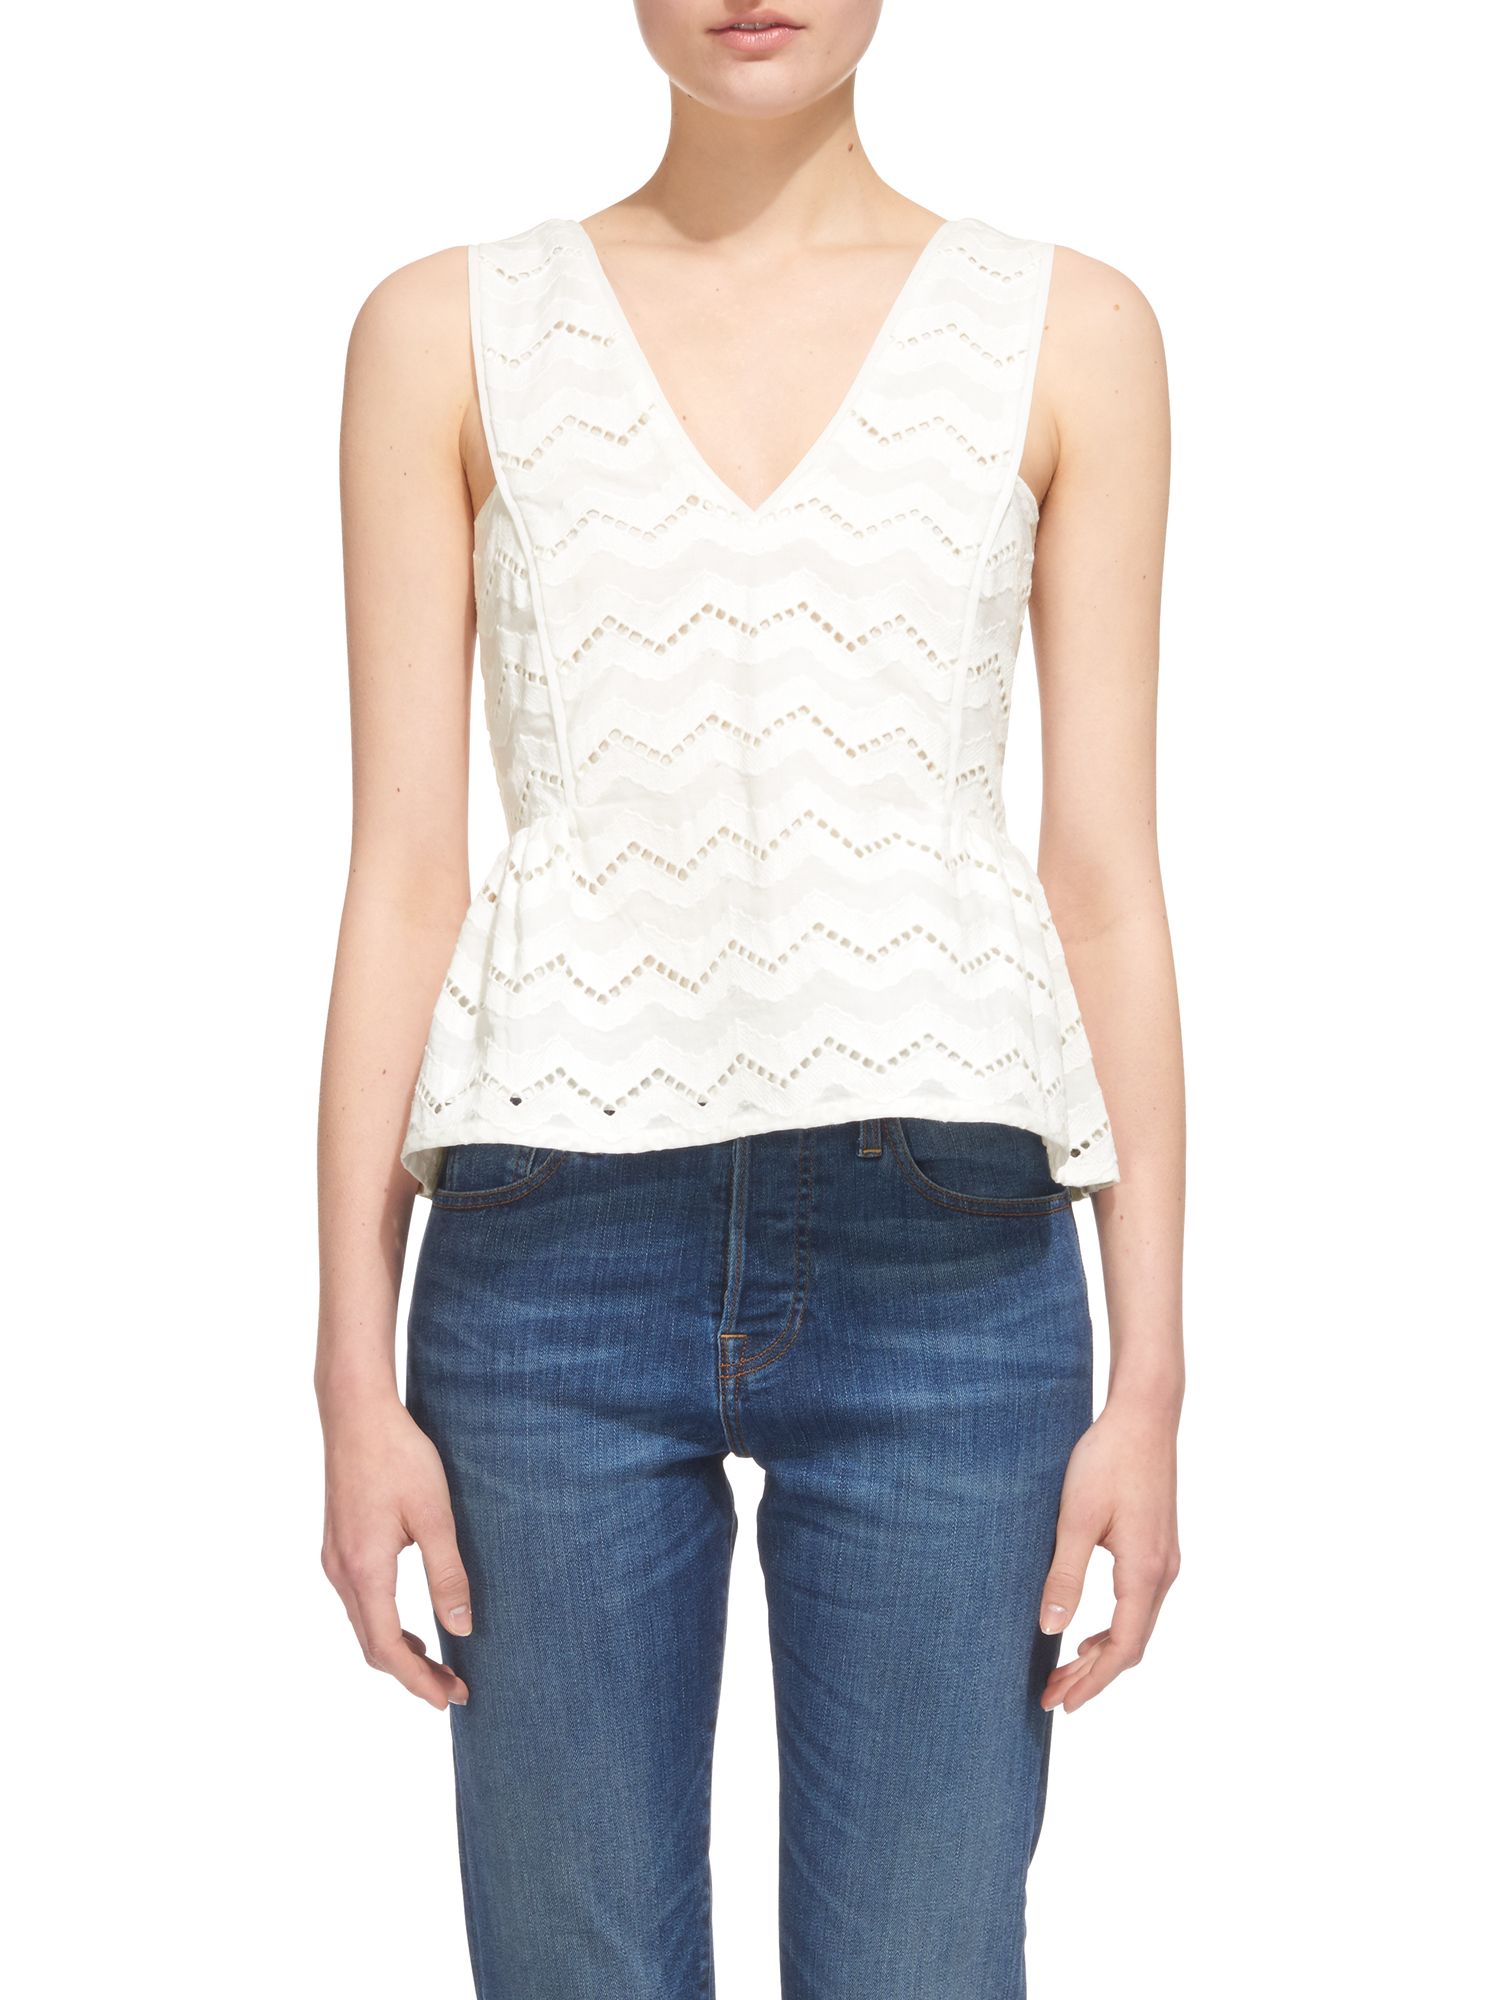 Whistles Caterina Frill Hem Crop Top, Ivory